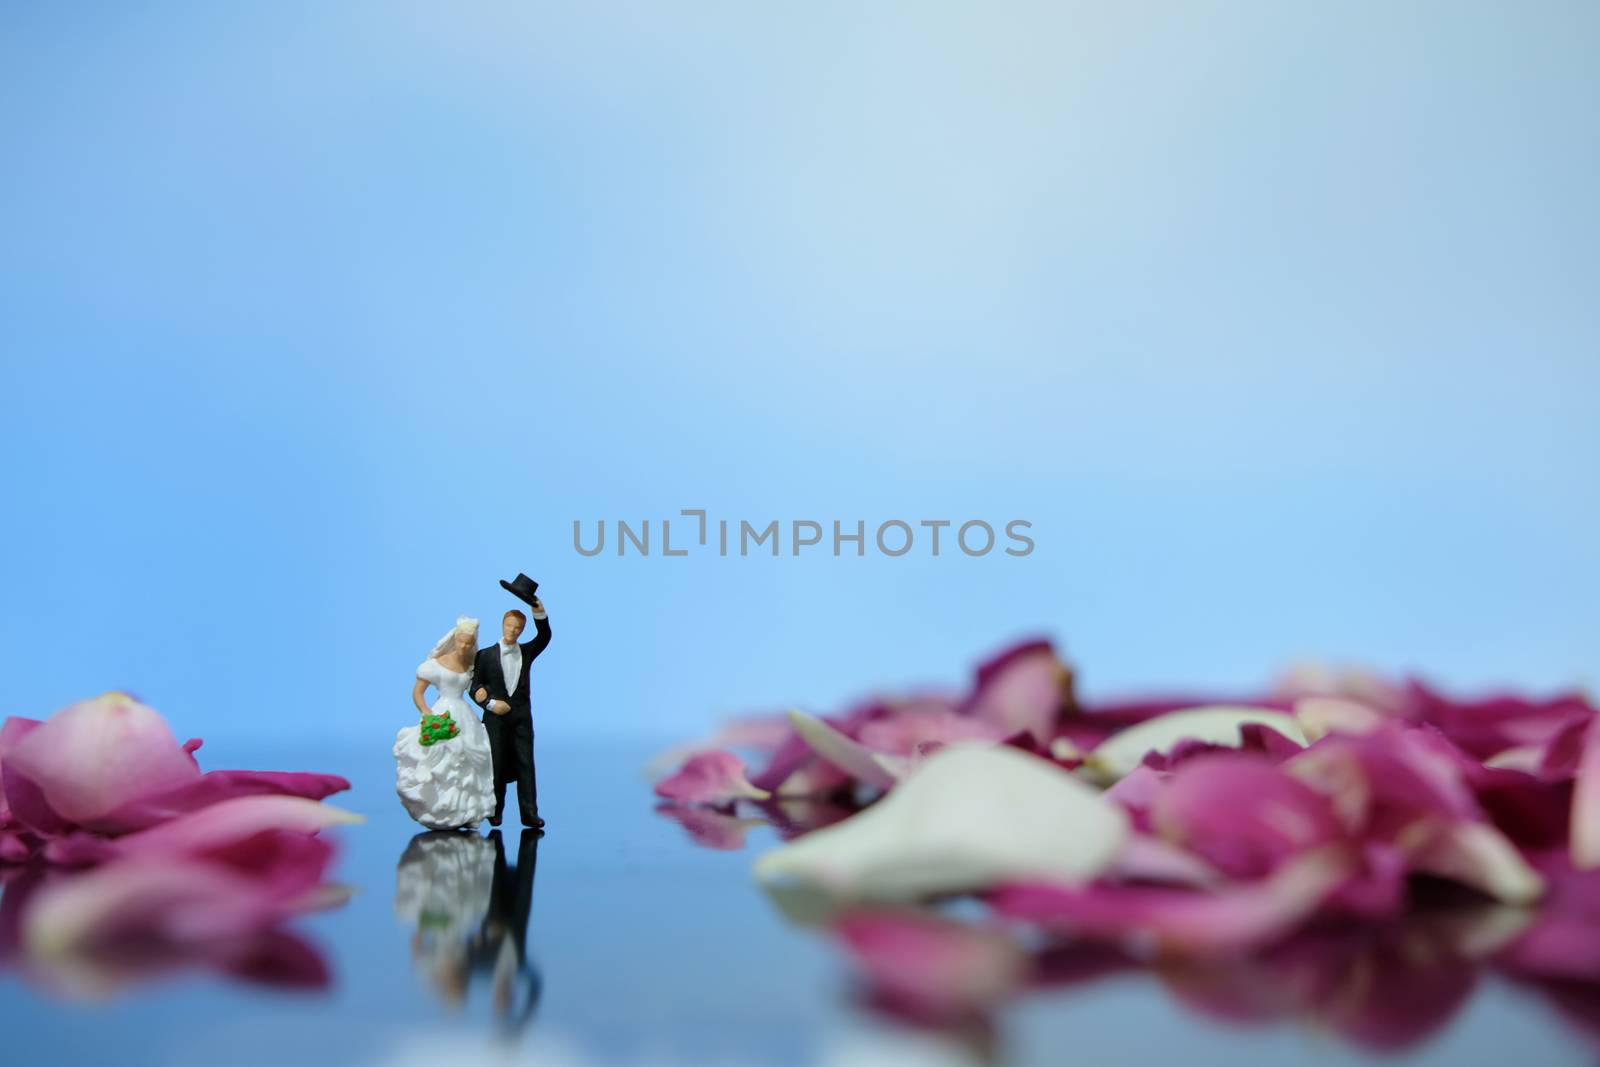 Miniature photography outdoor marriage wedding concept, bride and groom walking on red white rose flower pile